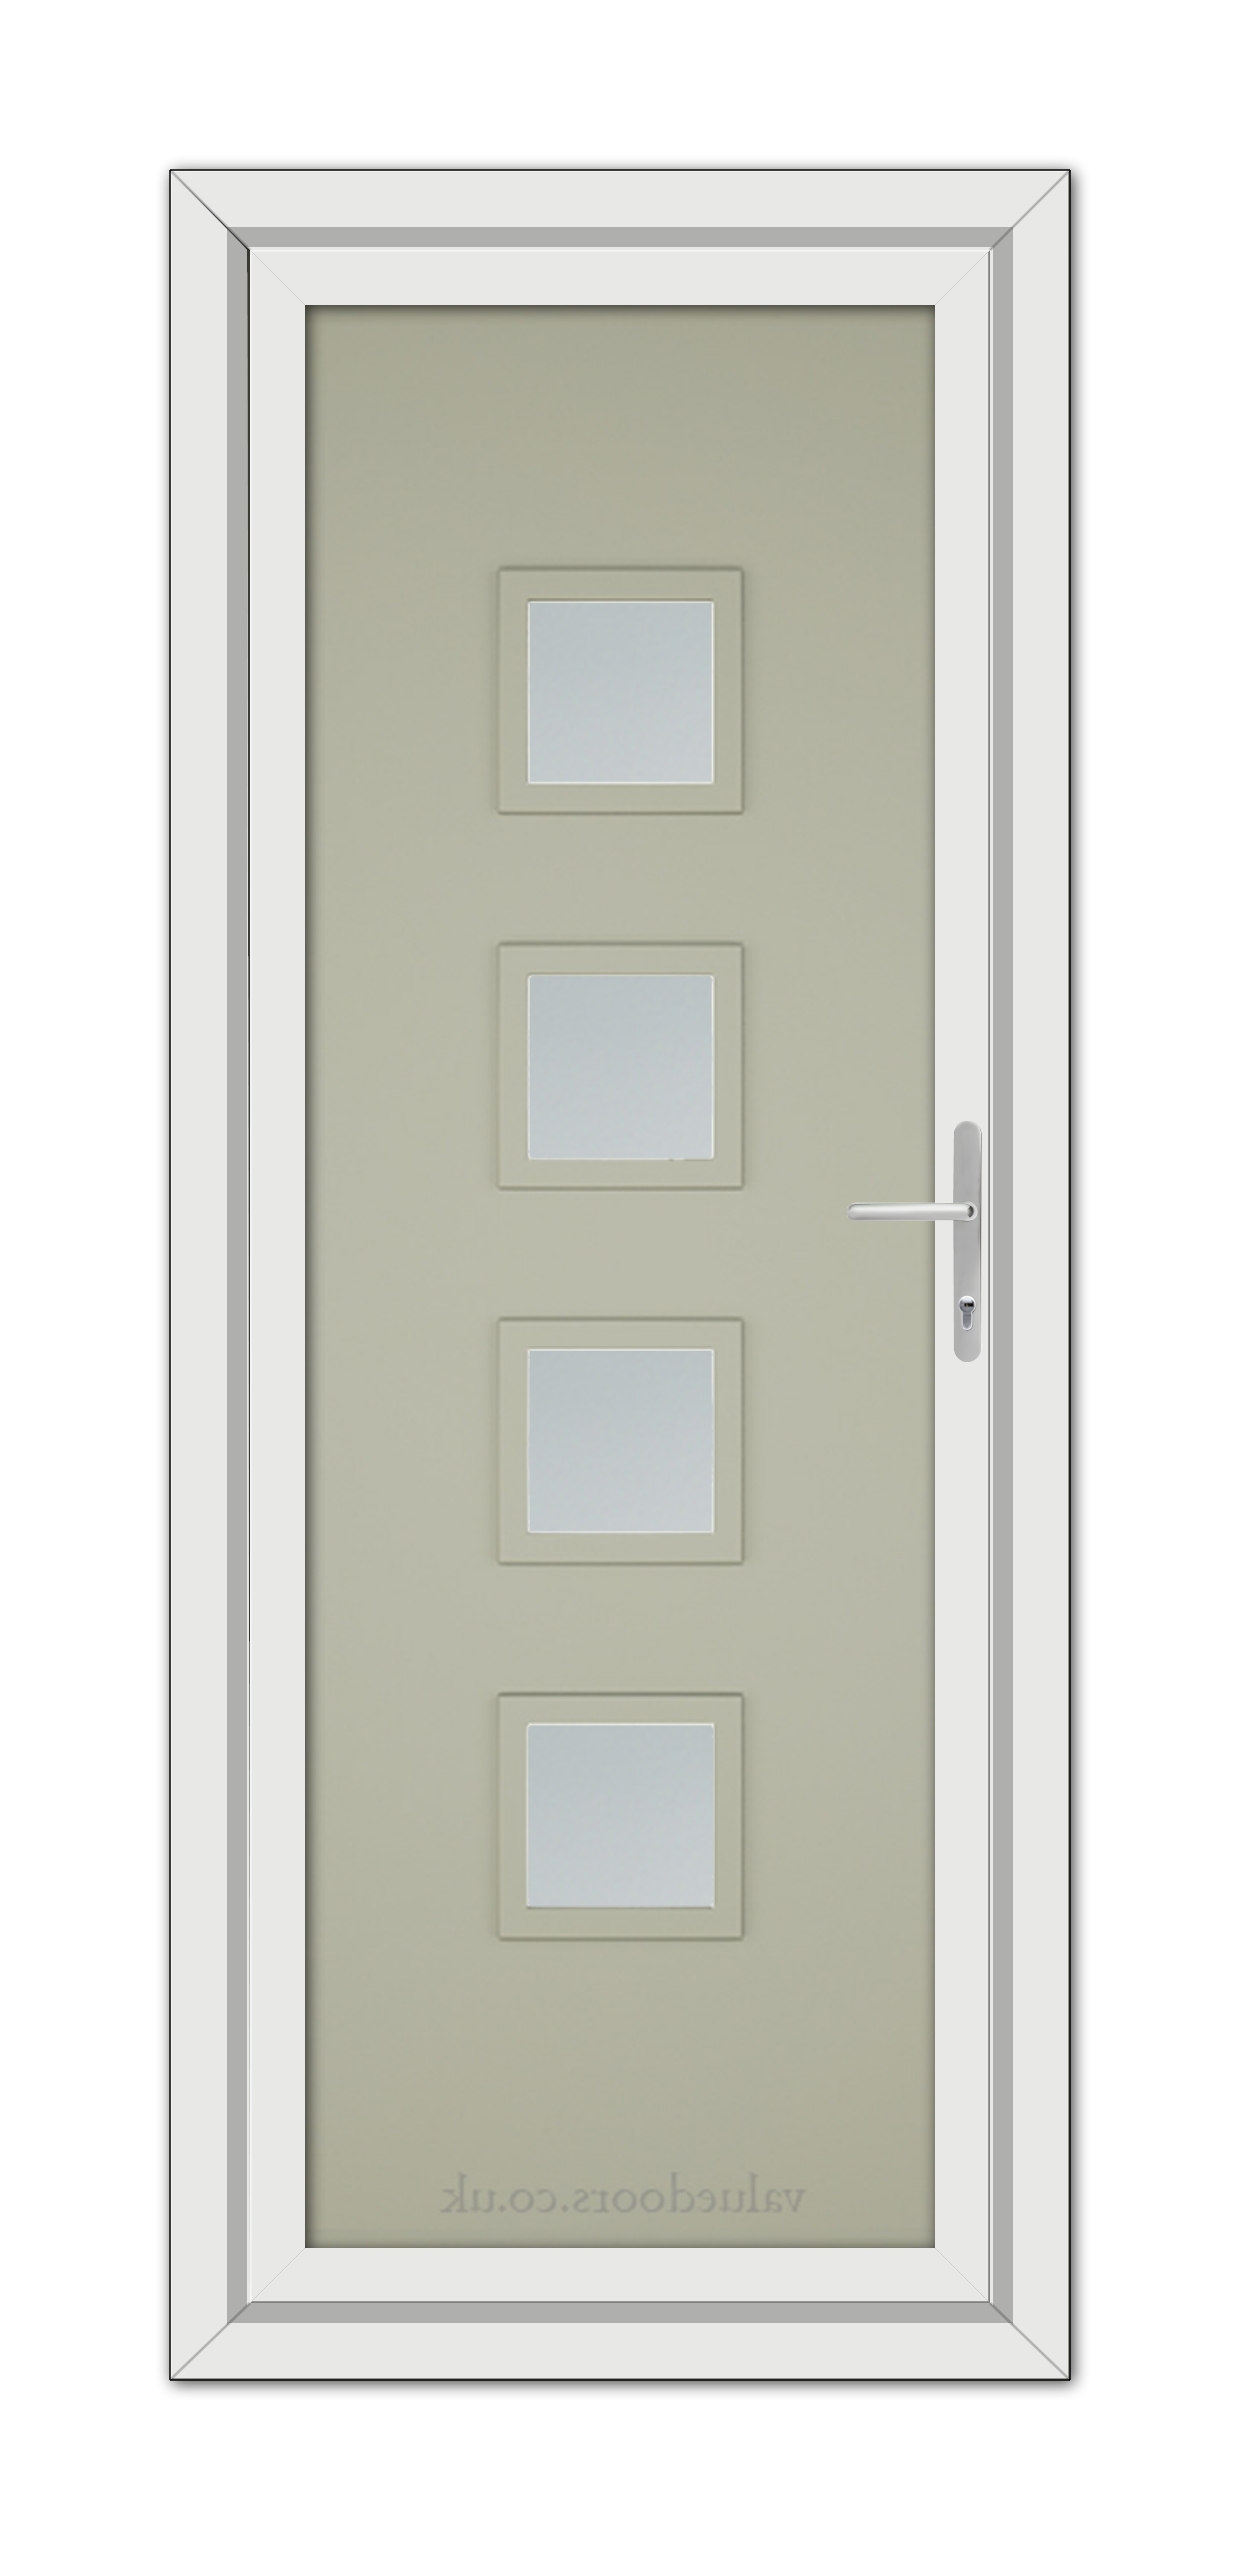 Agate Grey Modern 5034 uPVC door with four small square glass panels and a metal handle, set in a white frame.